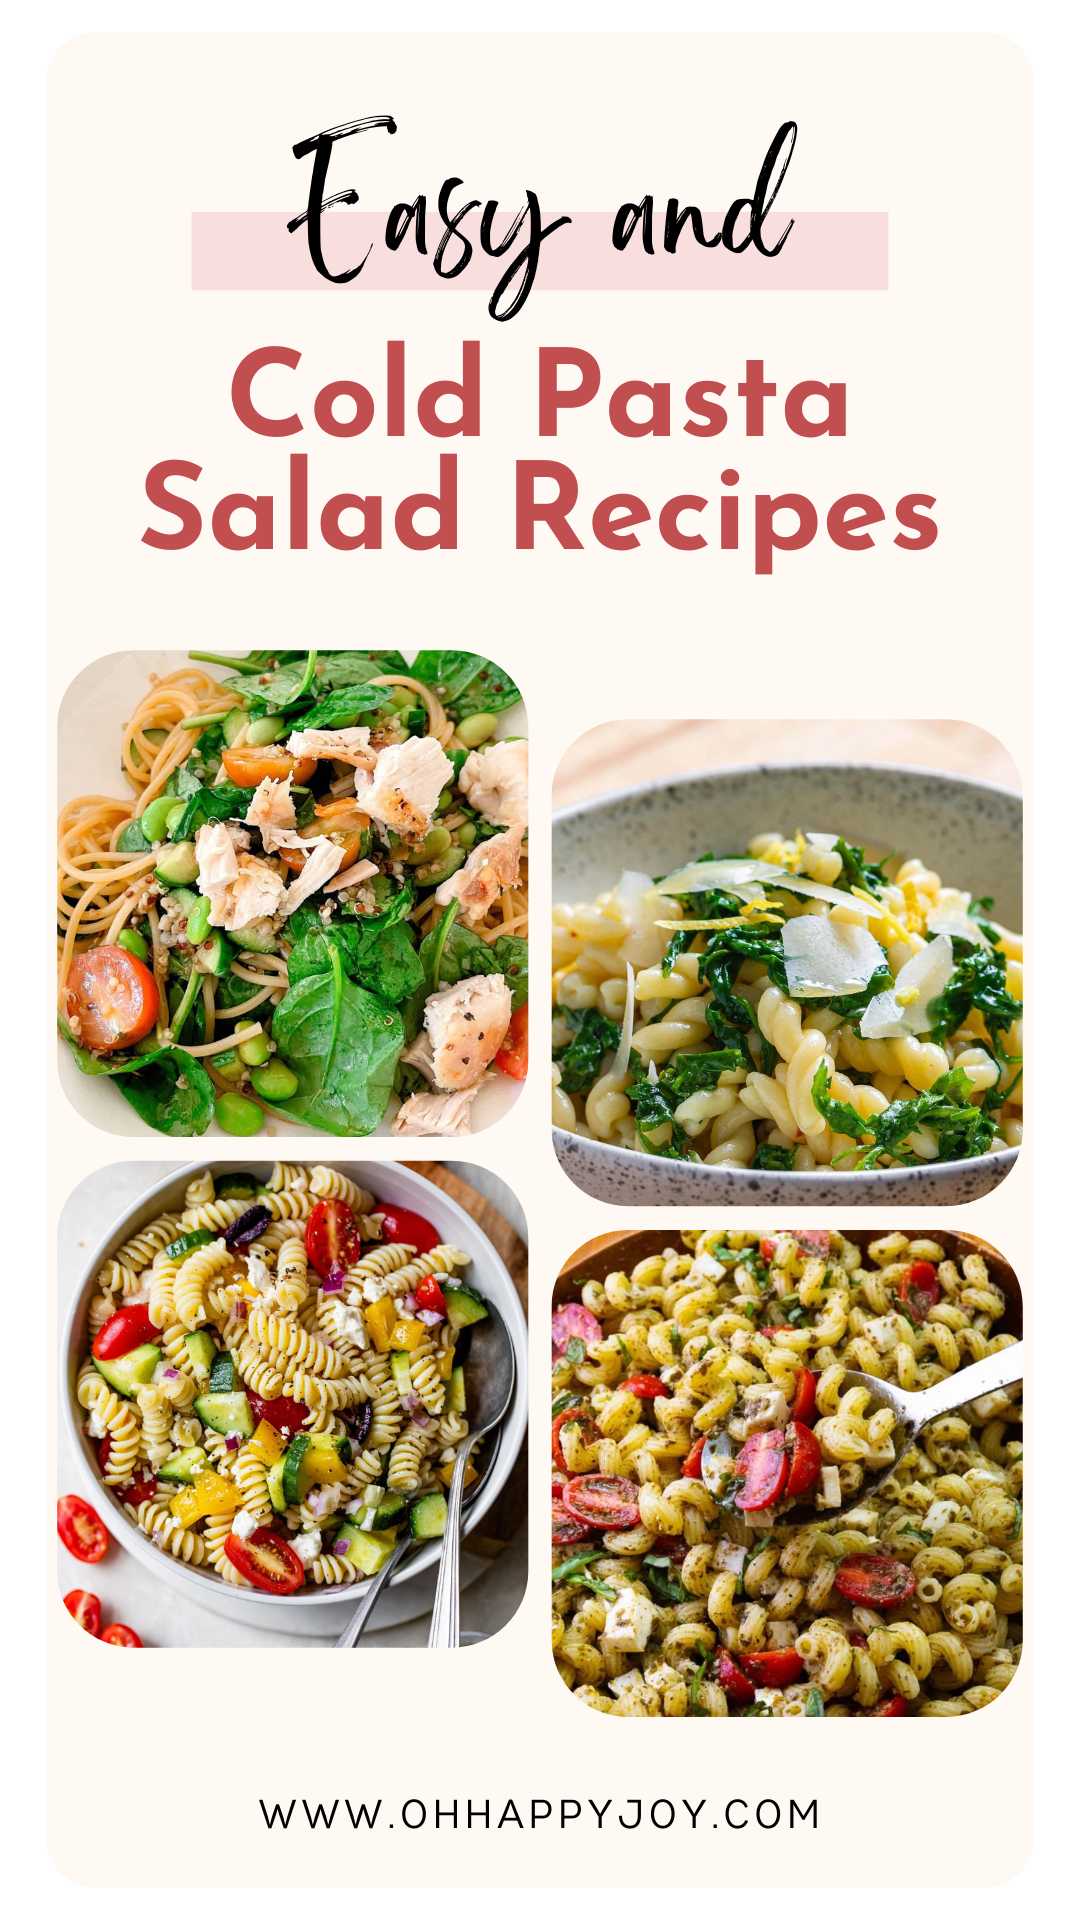 Easy and Cold Pasta Salad Recipes